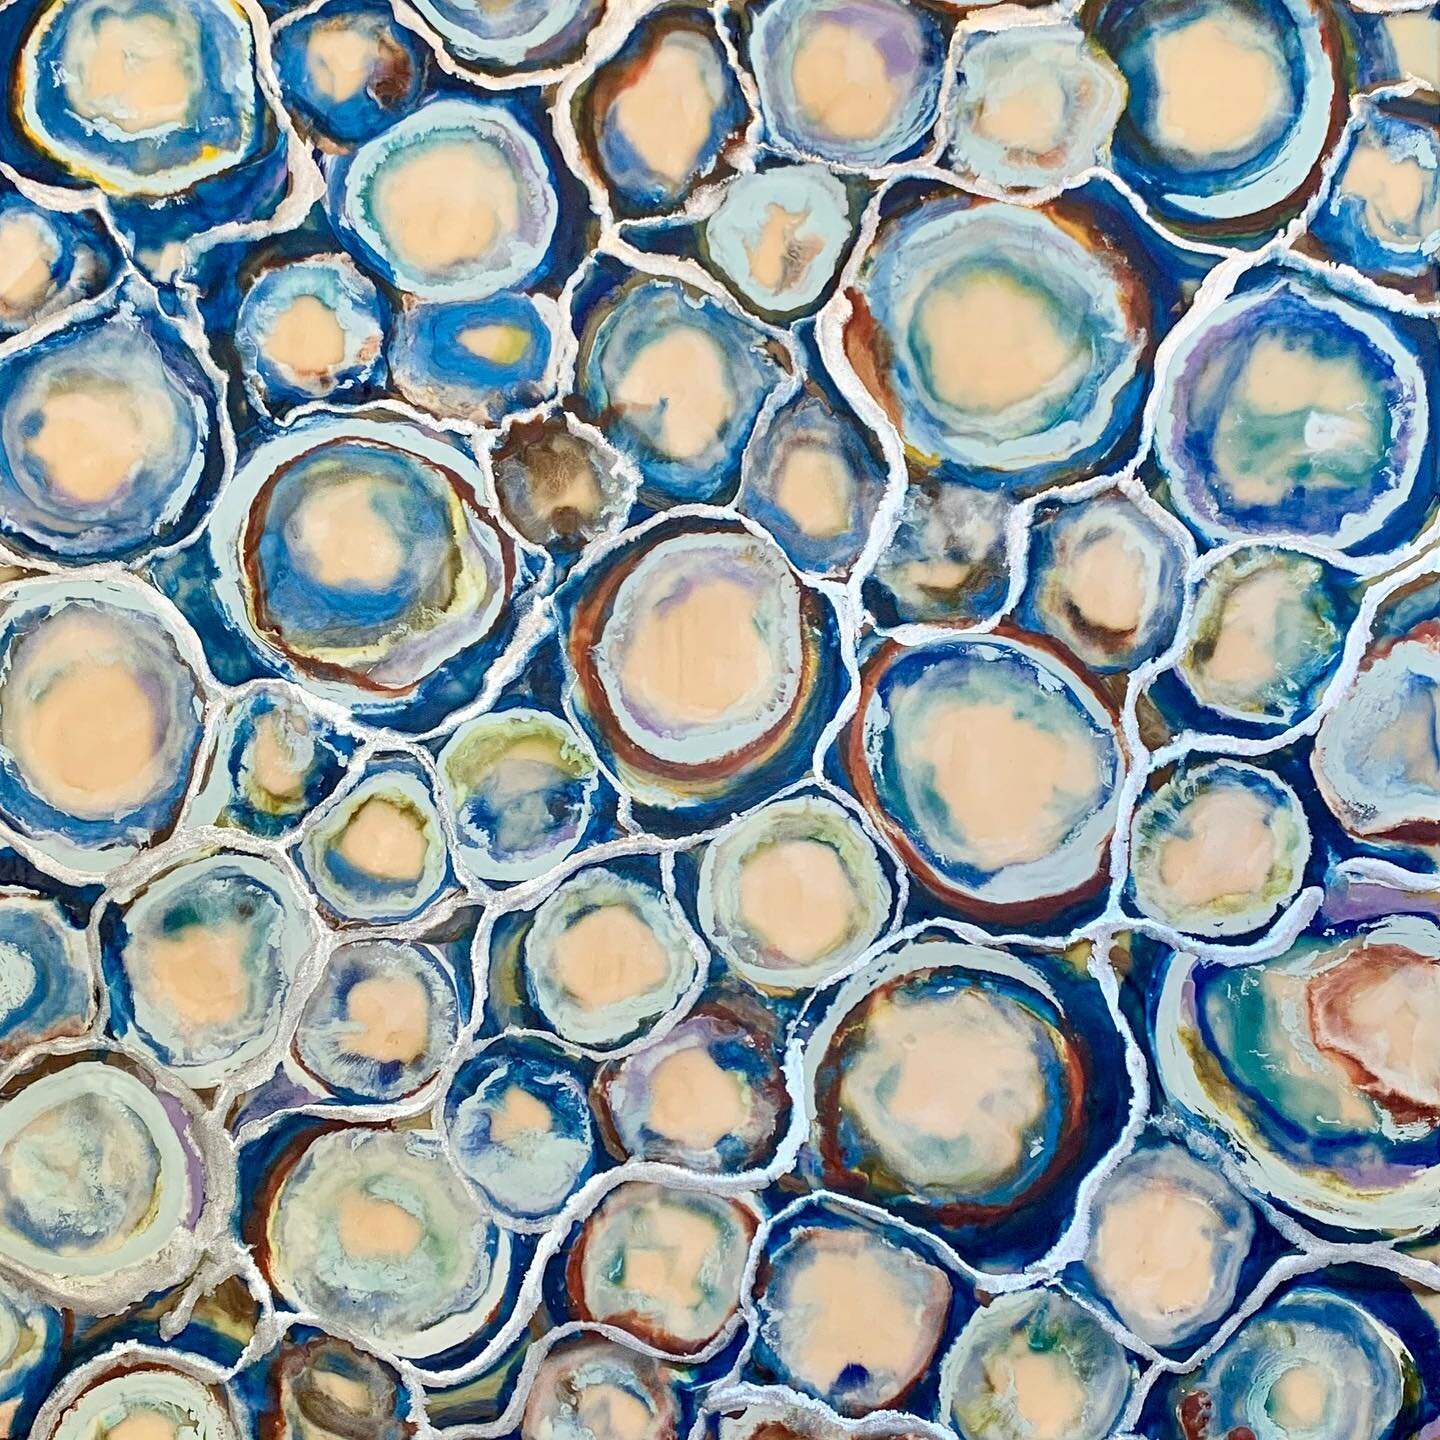 After taking all summer to move into my new studio (#4, above Lyon&rsquo;s) I&rsquo;m easing back into painting by another version of the Oysters. &ldquo;Silvered Fracture&rdquo;, 24x48, encaustic.
#encausticart #encausticpainting #encaustic #encaust